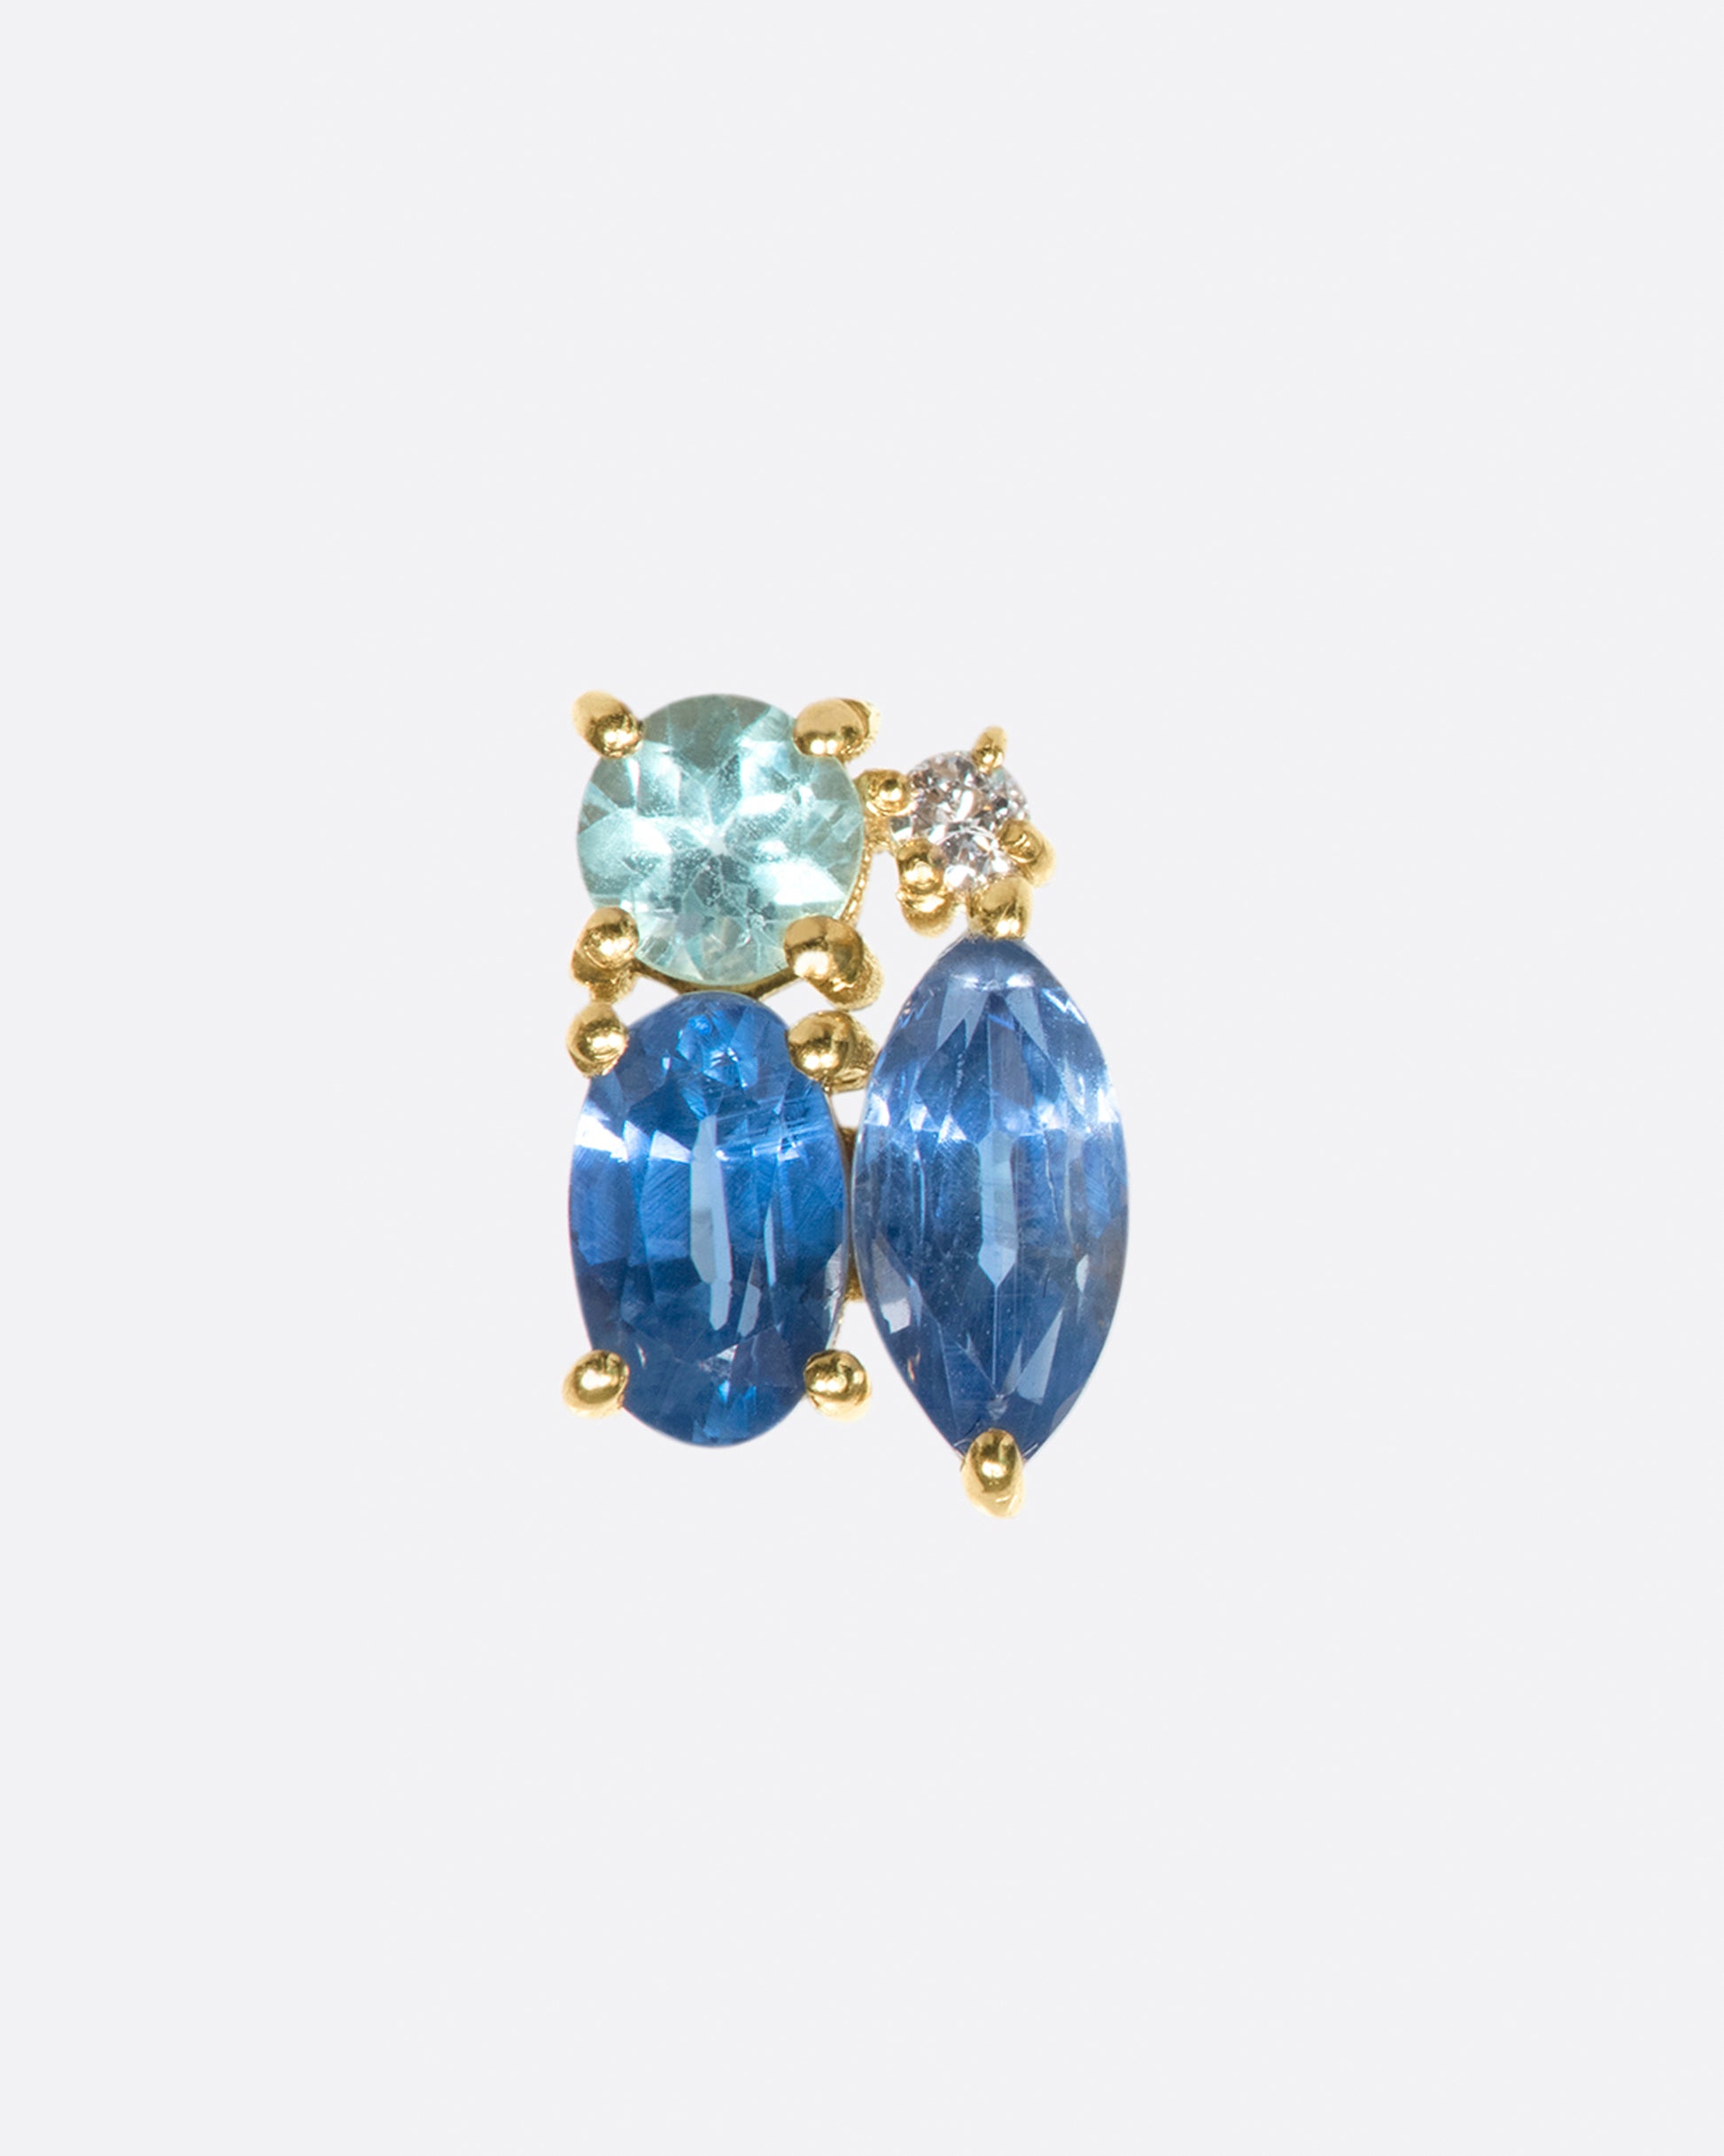 One of Eva Noga's beloved cluster studs, this time in shade of blue.